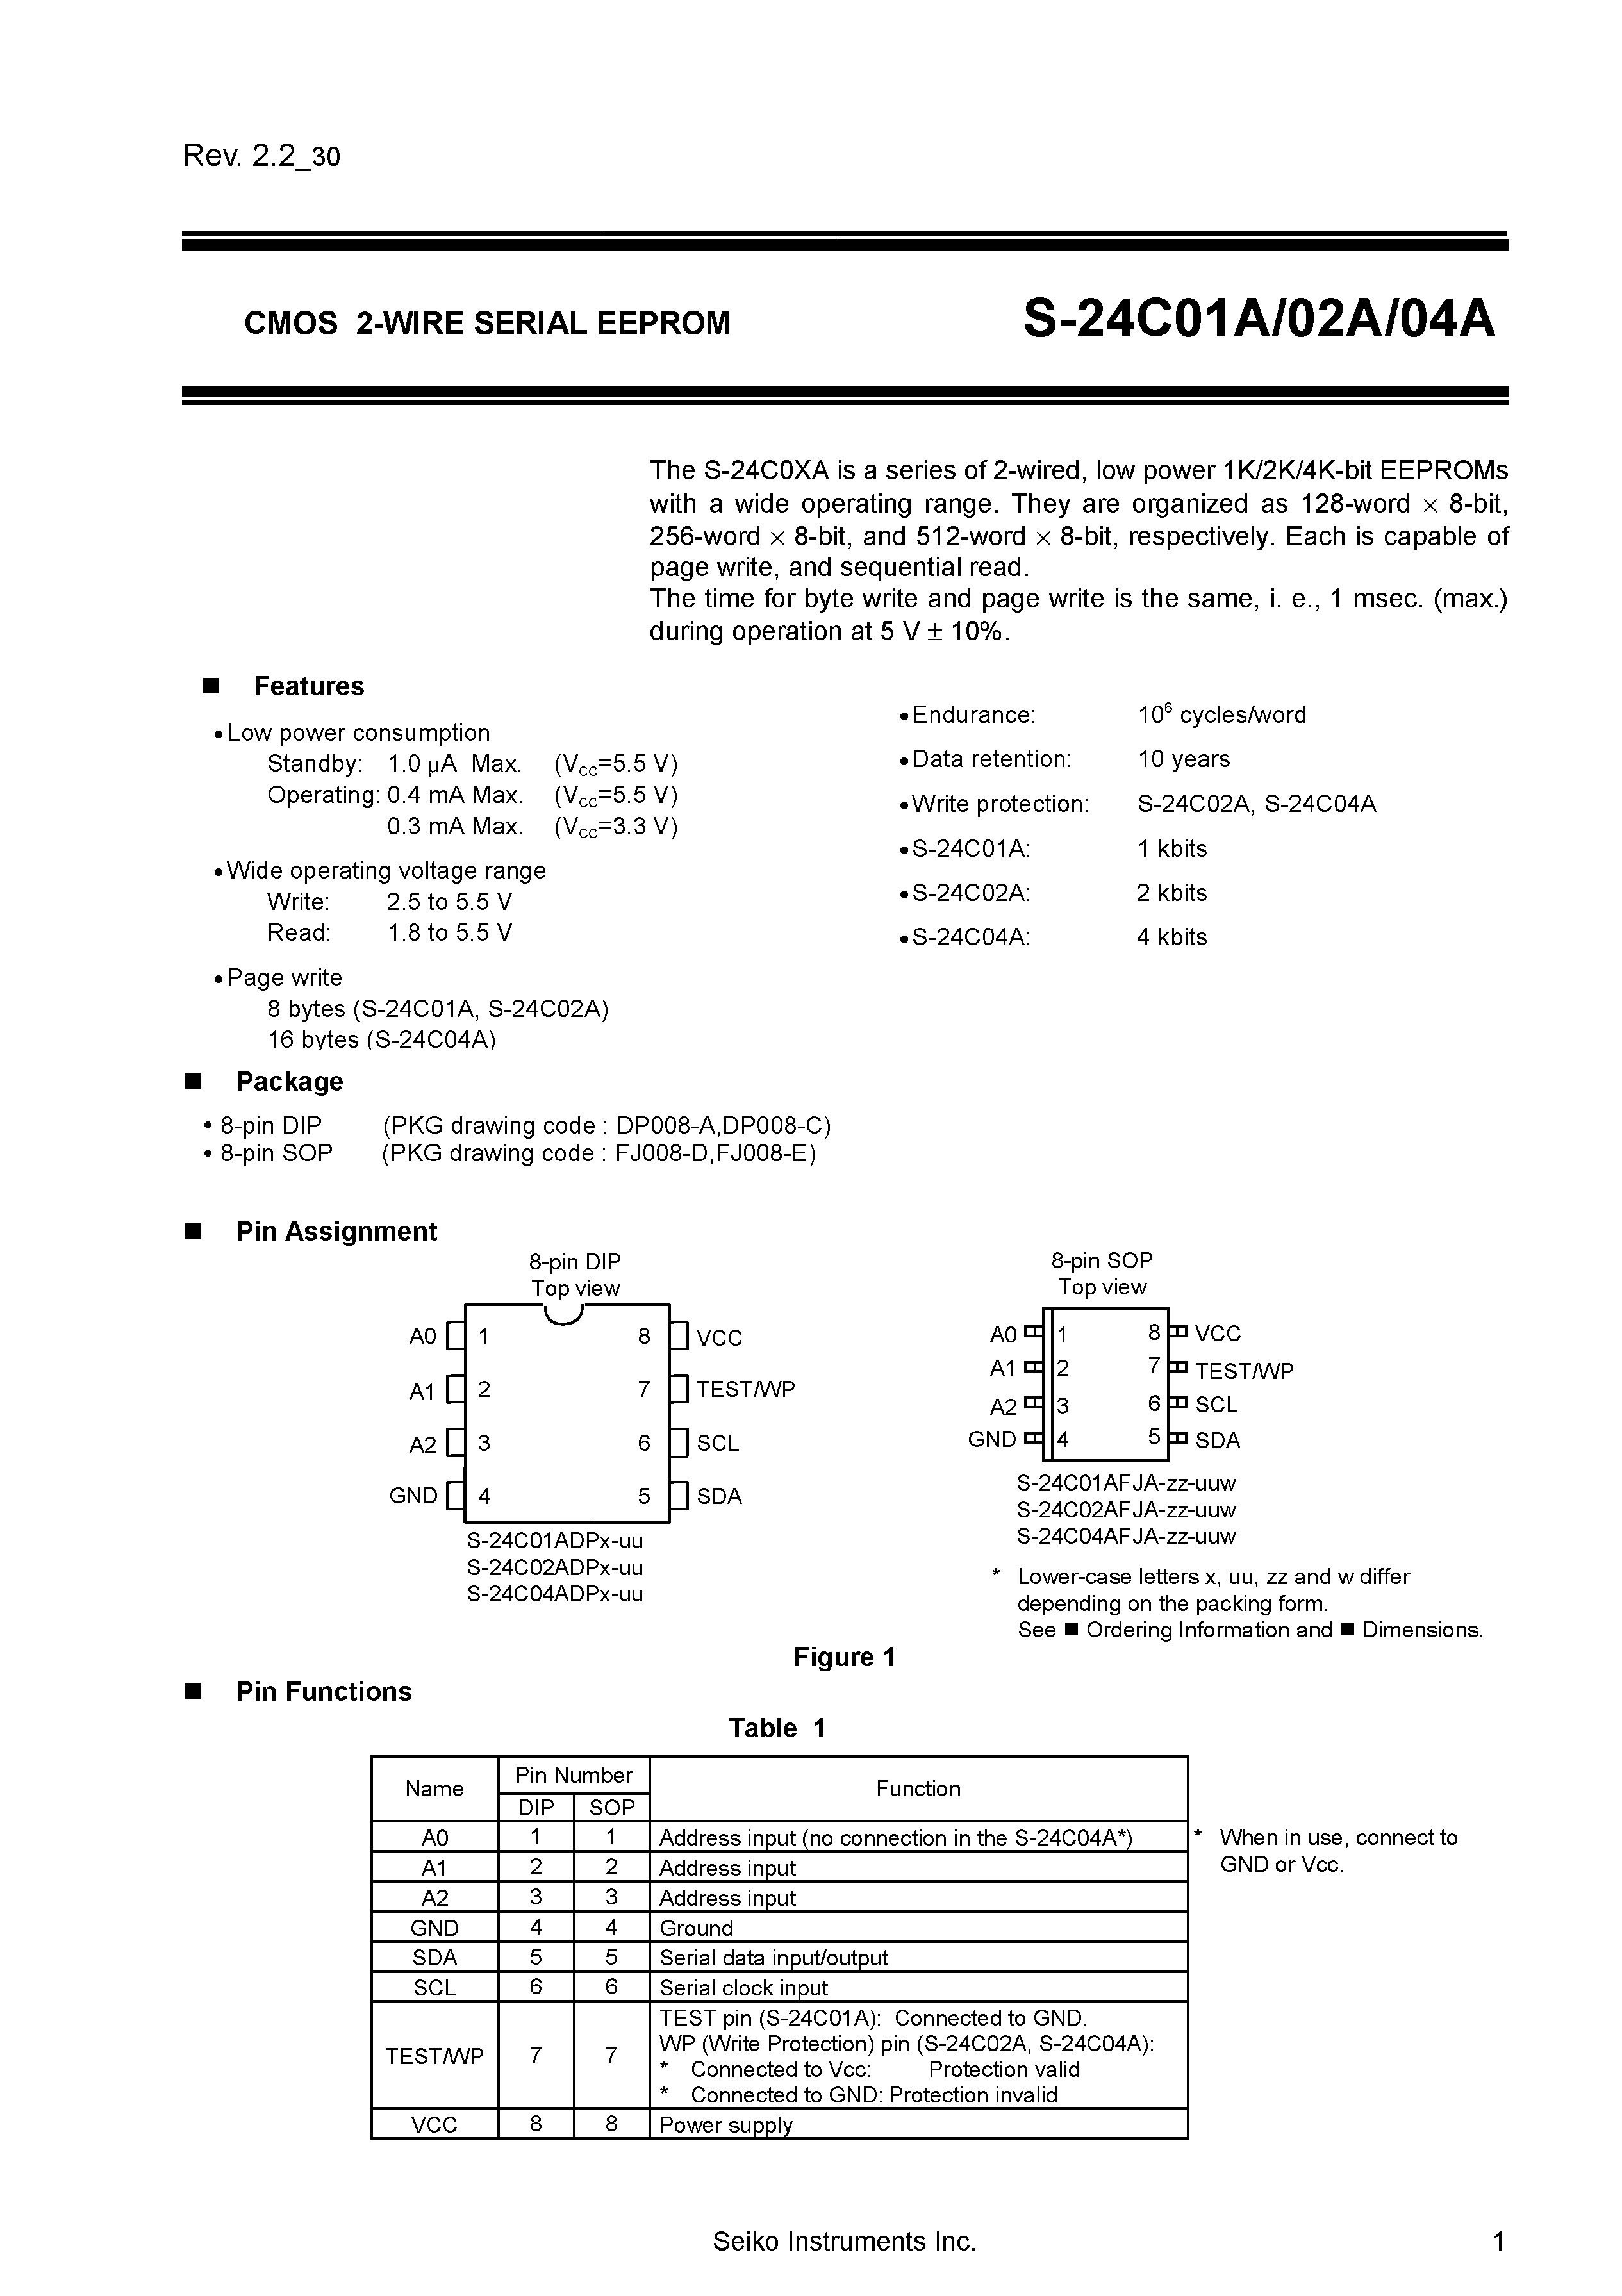 Datasheet S-24C01ADPA-11-S - CMOS 2-WIRE SERIAL EEPROM page 1